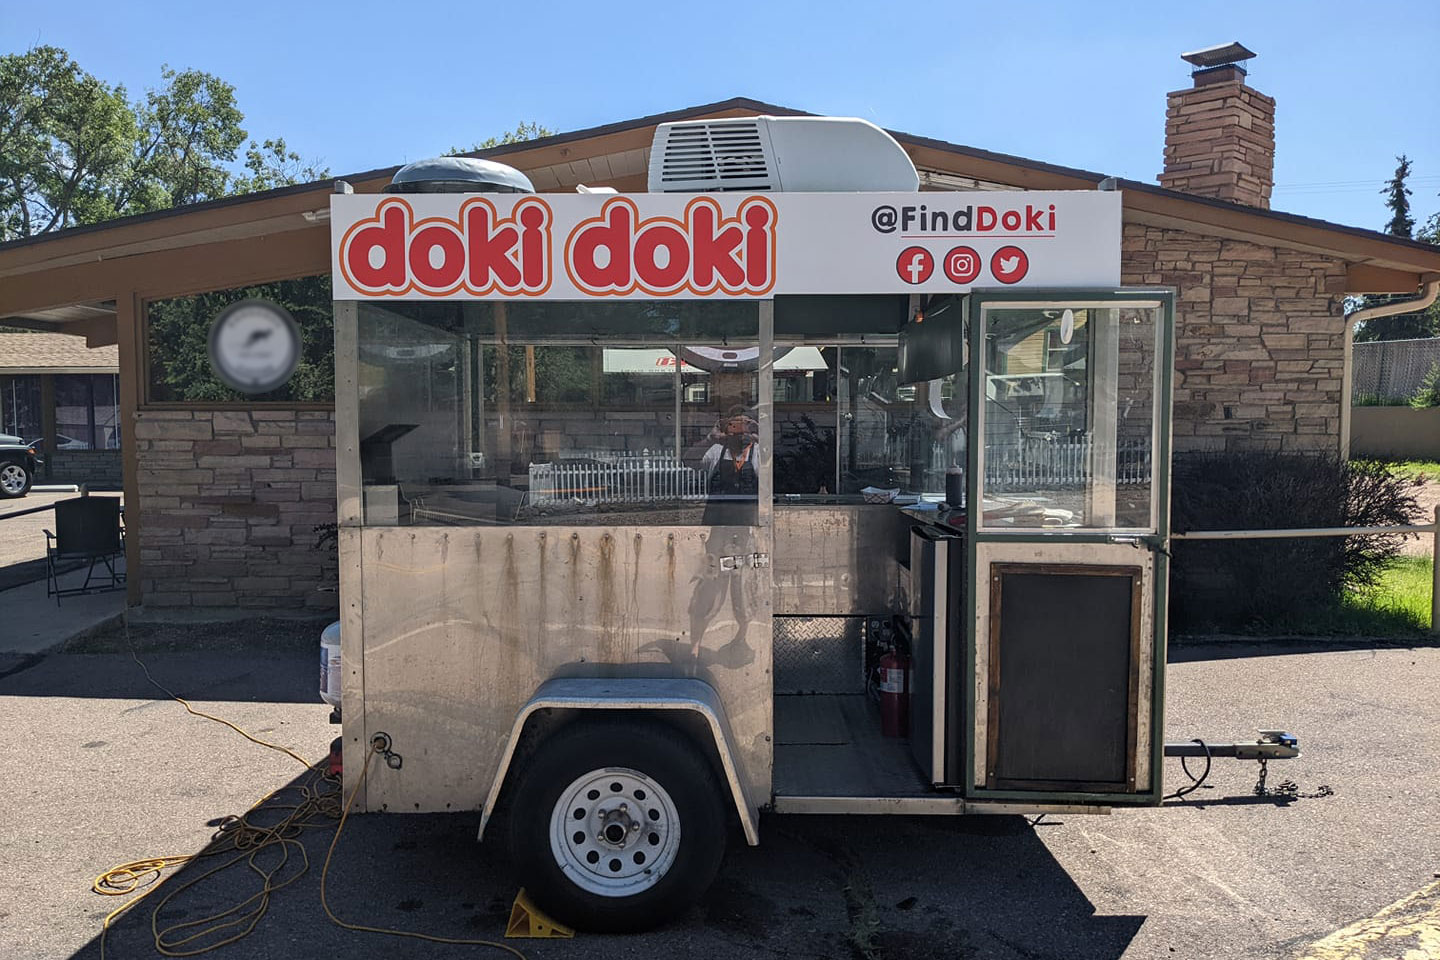 Doki Doki is a Japanese pub food trailer. If you are in the Colorado Springs area see if you can find Doki.
https://www.facebook.com/FindDoki